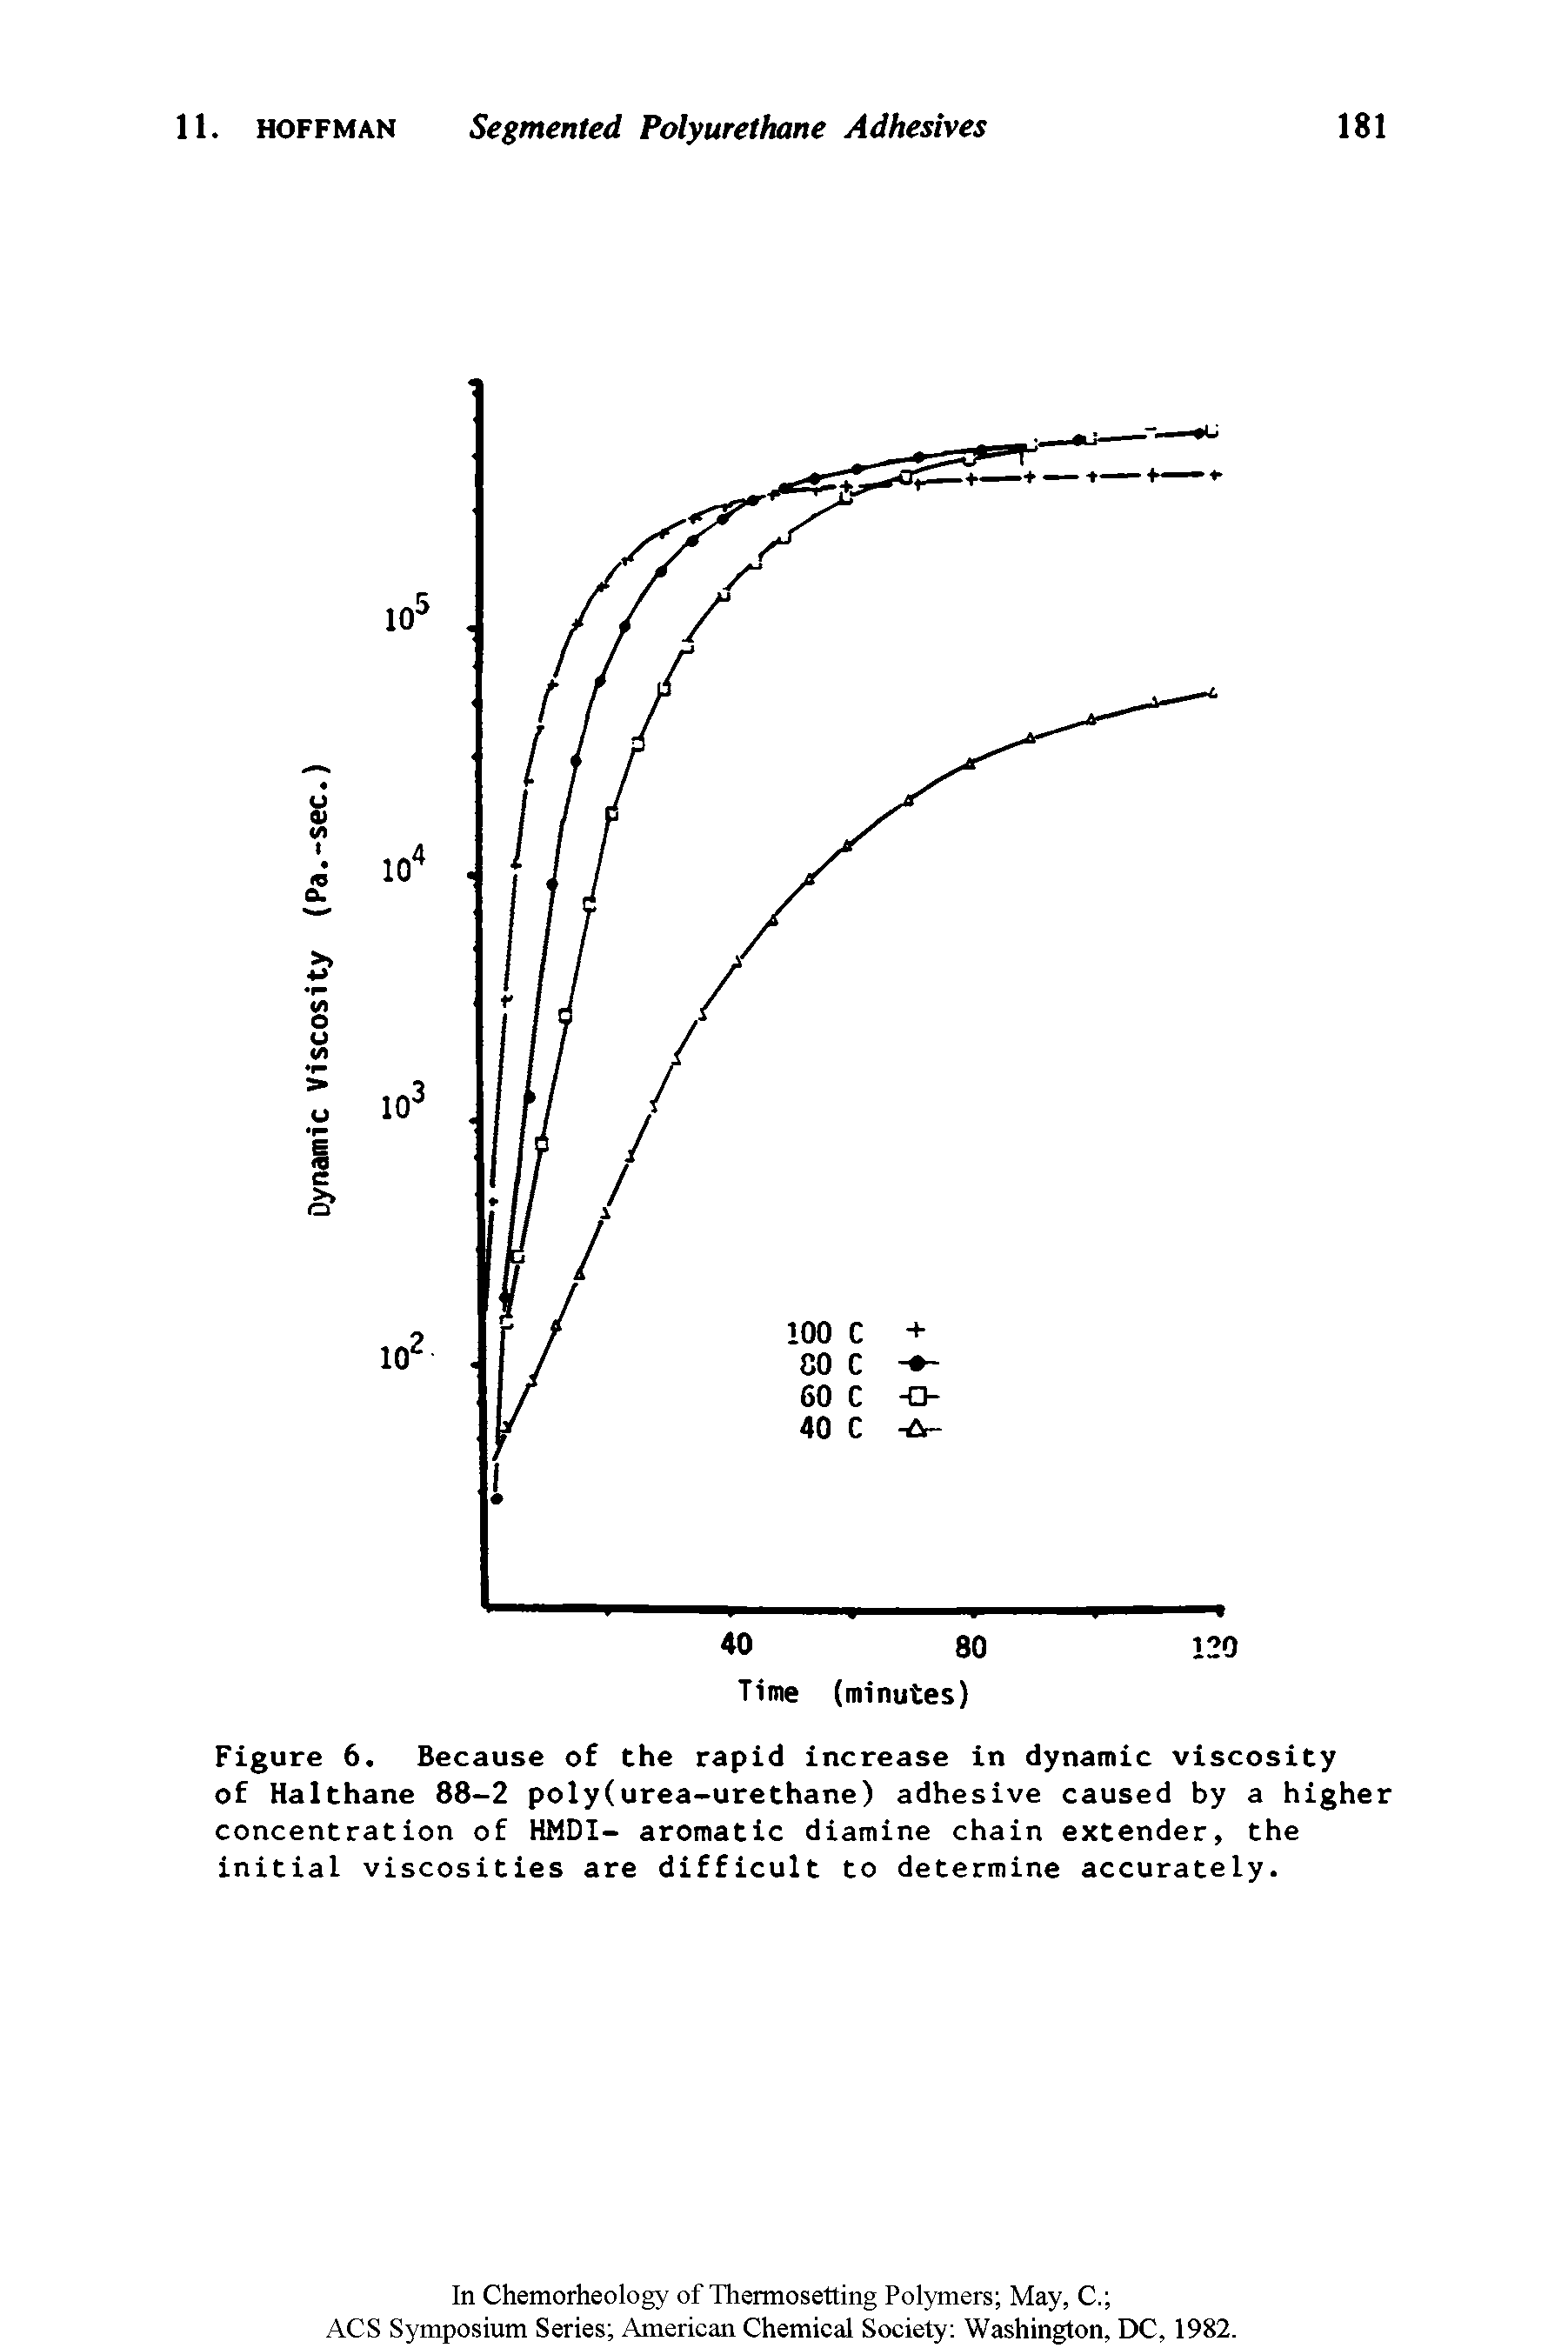 Figure 6. Because of the rapid increase in dynamic viscosity of Halthane 88-2 poly(urea-urethane) adhesive caused by a higher concentration of HMDI- aromatic diamine chain extender, the initial viscosities are difficult to determine accurately.